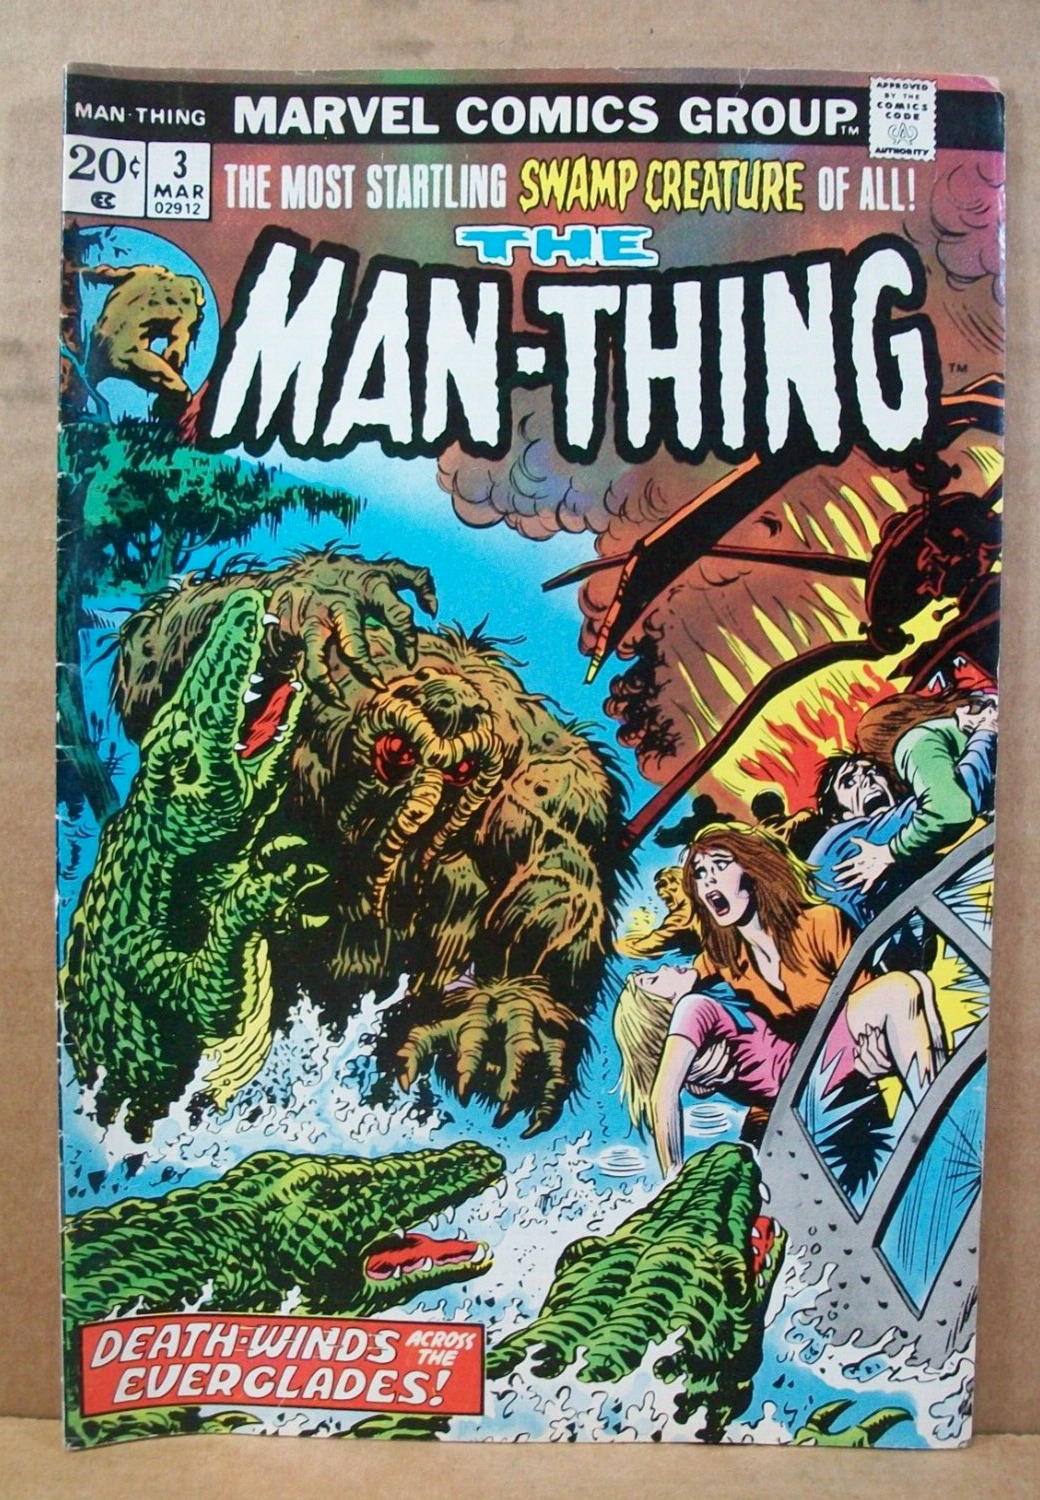 The Man-Thing #3 (Marvel Comics, March 1974) FN+